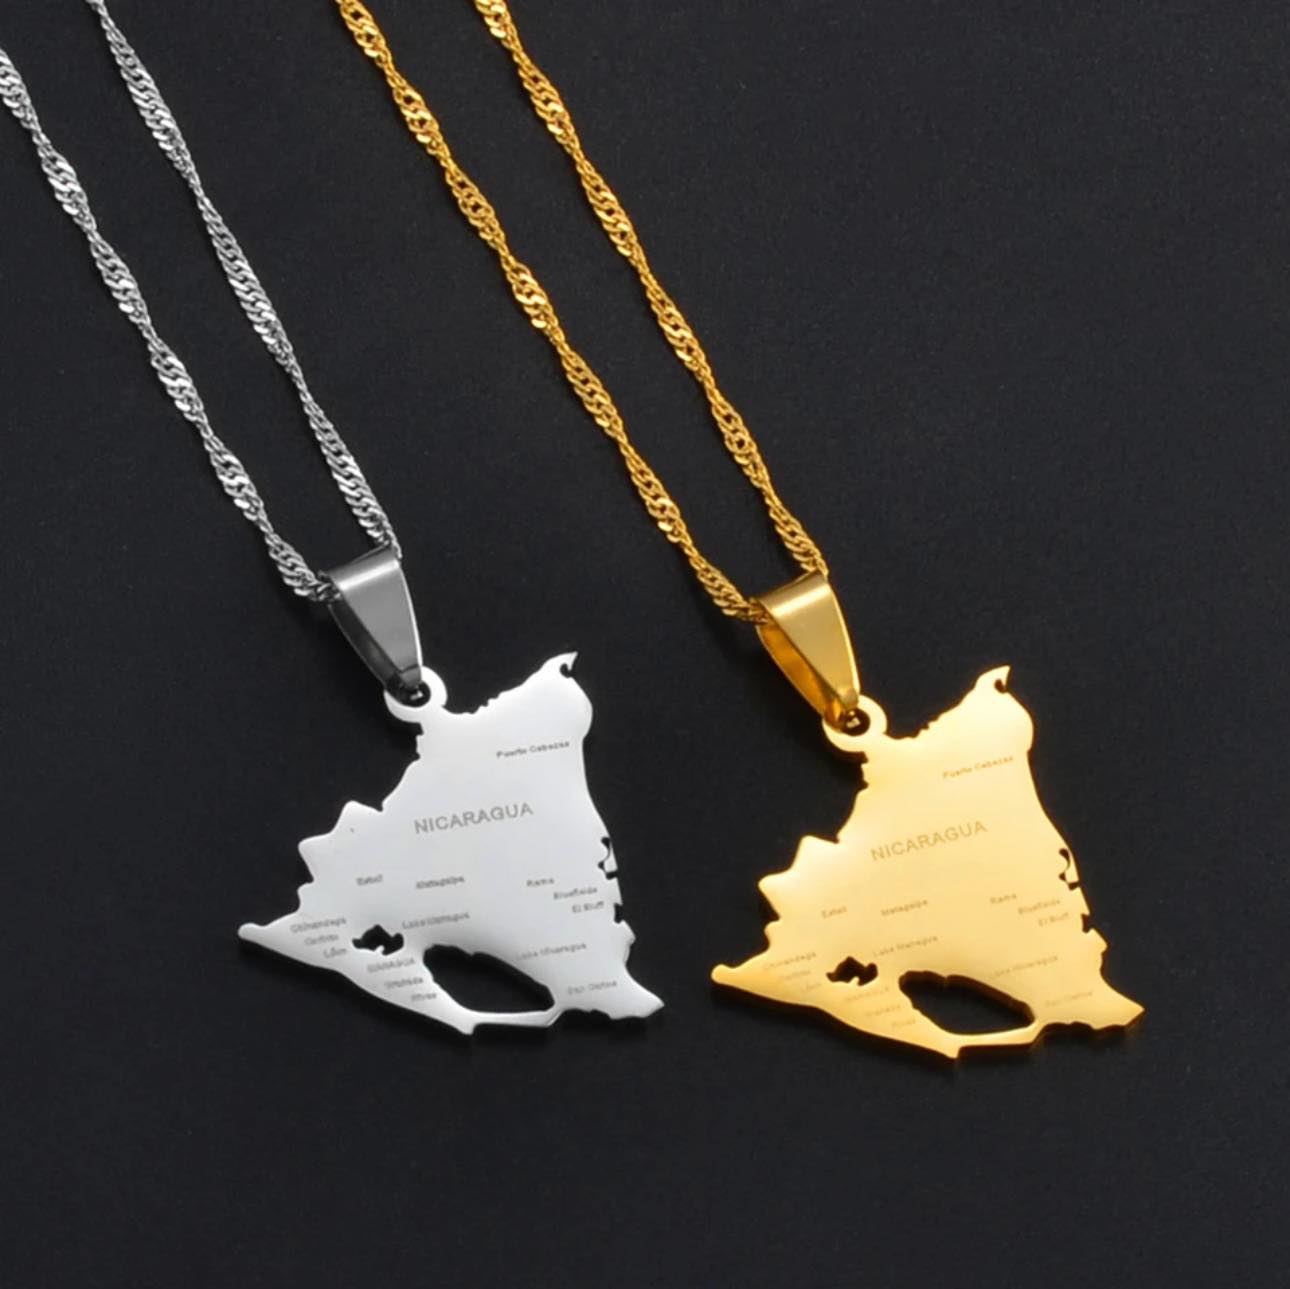 Nicaragua Map & Cities Necklace